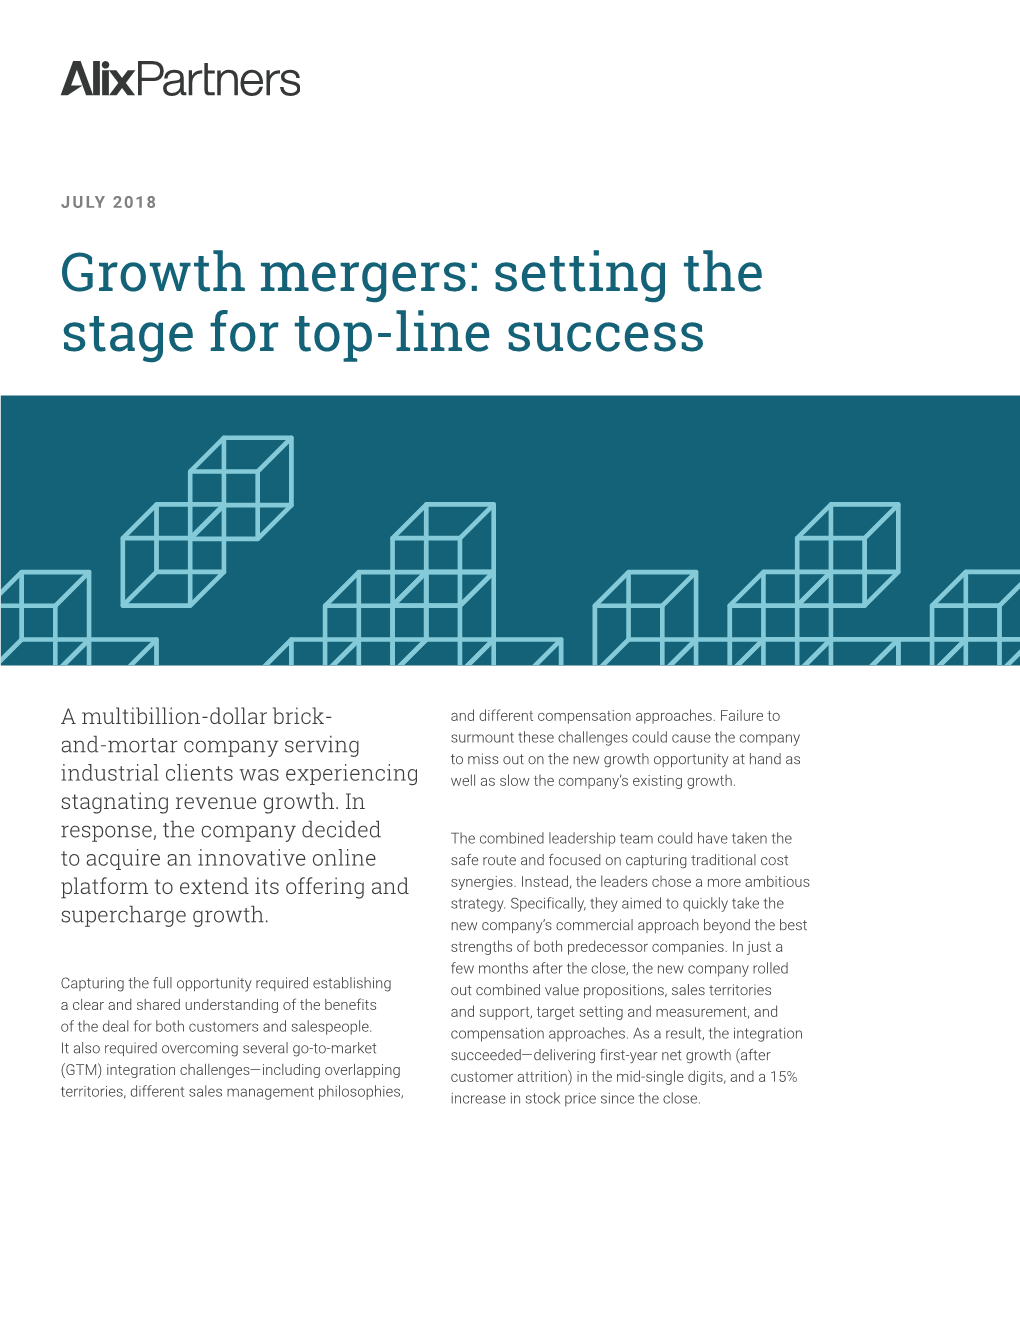 Growth Mergers: Setting the Stage for Top-Line Success